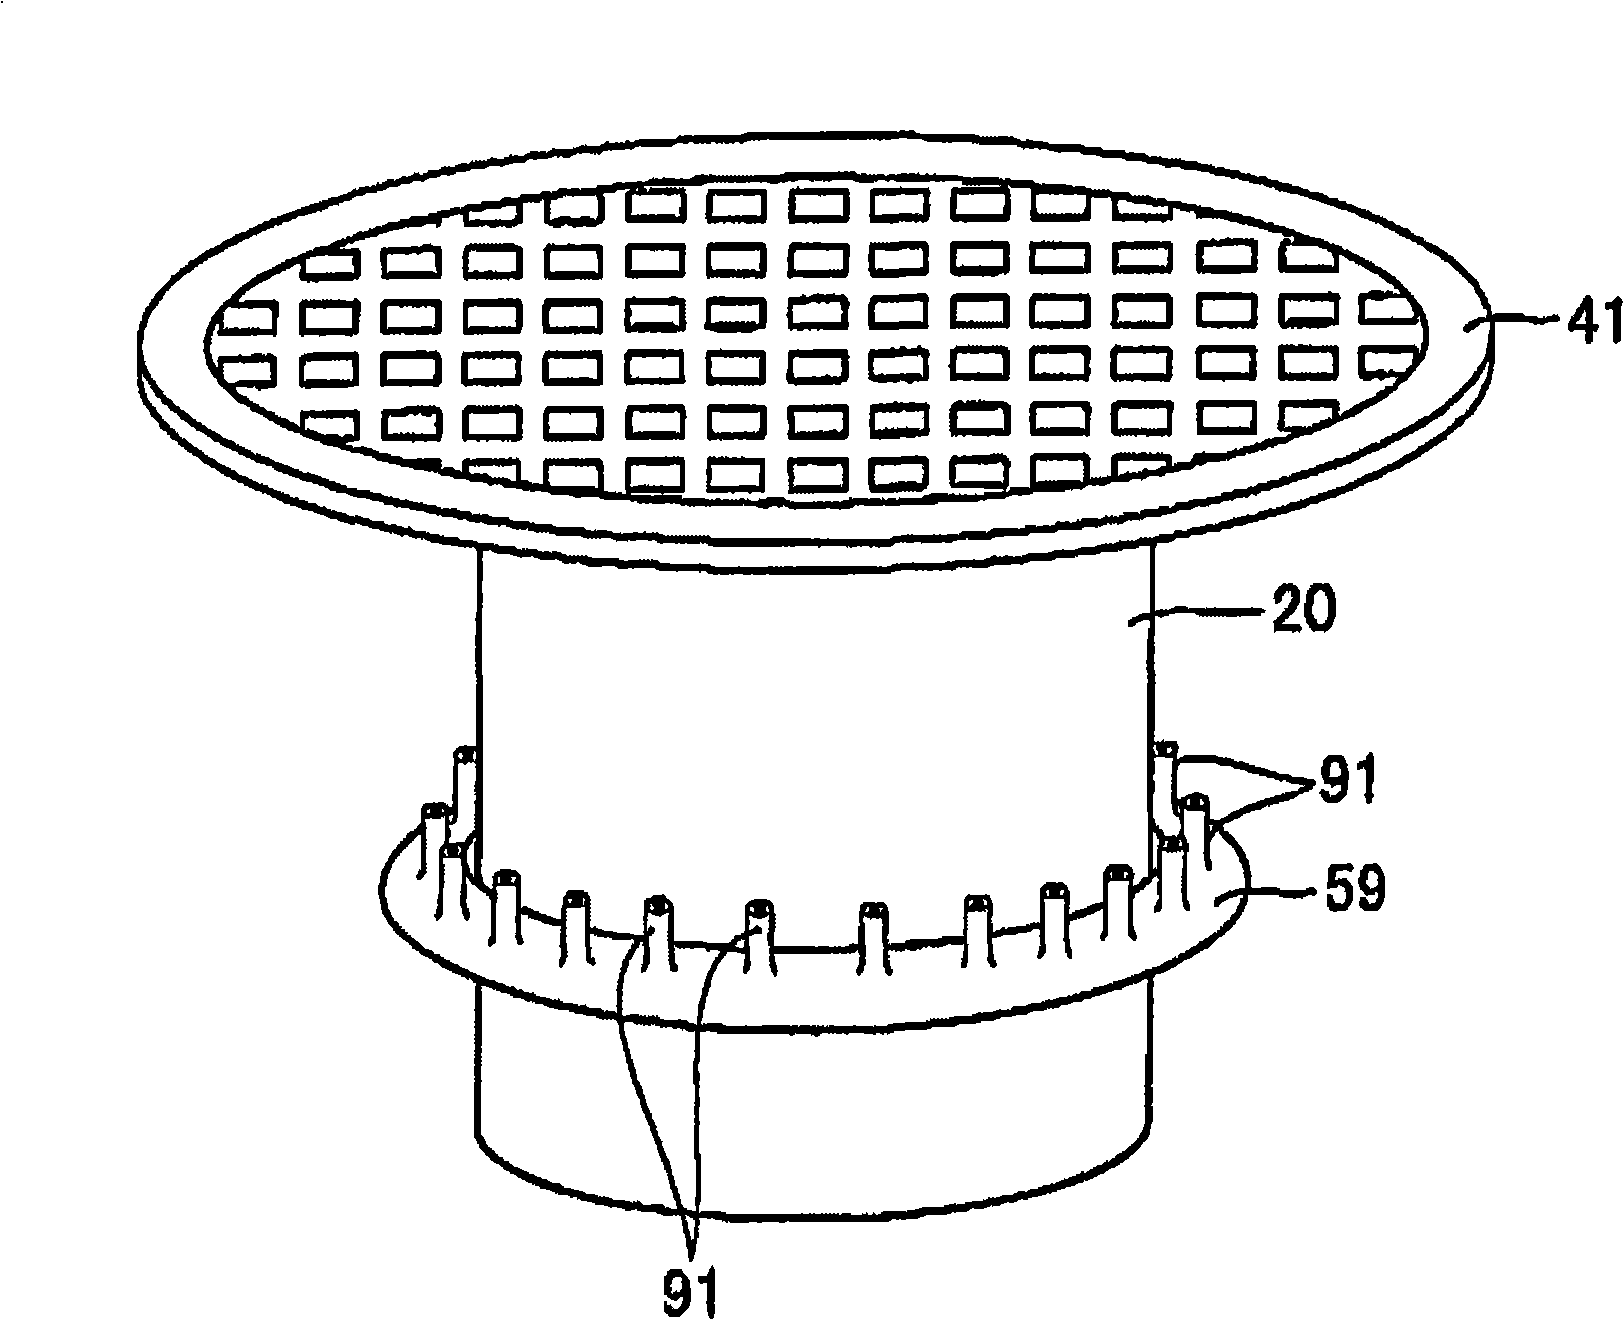 Apparatus for inspecting honeycomb structures